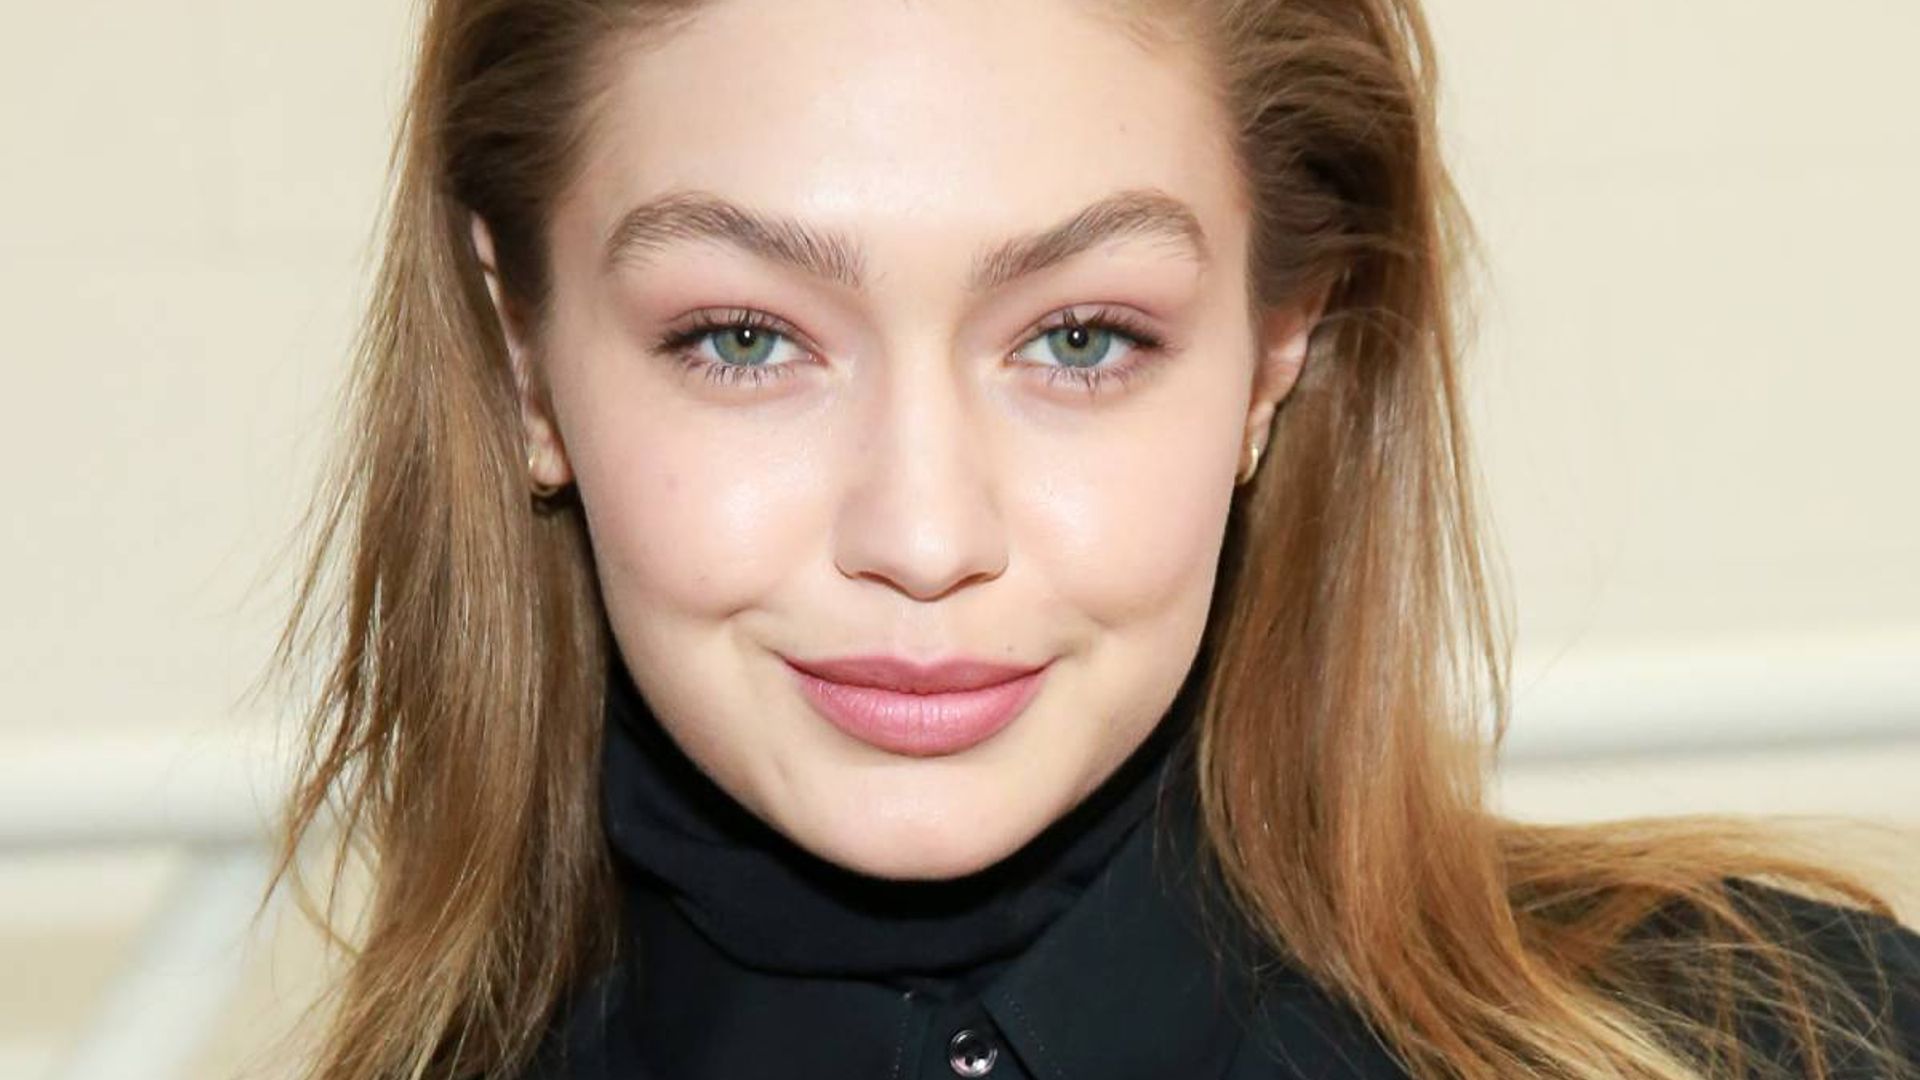 Gigi Hadid reveals adorable name necklace after welcoming baby daughter